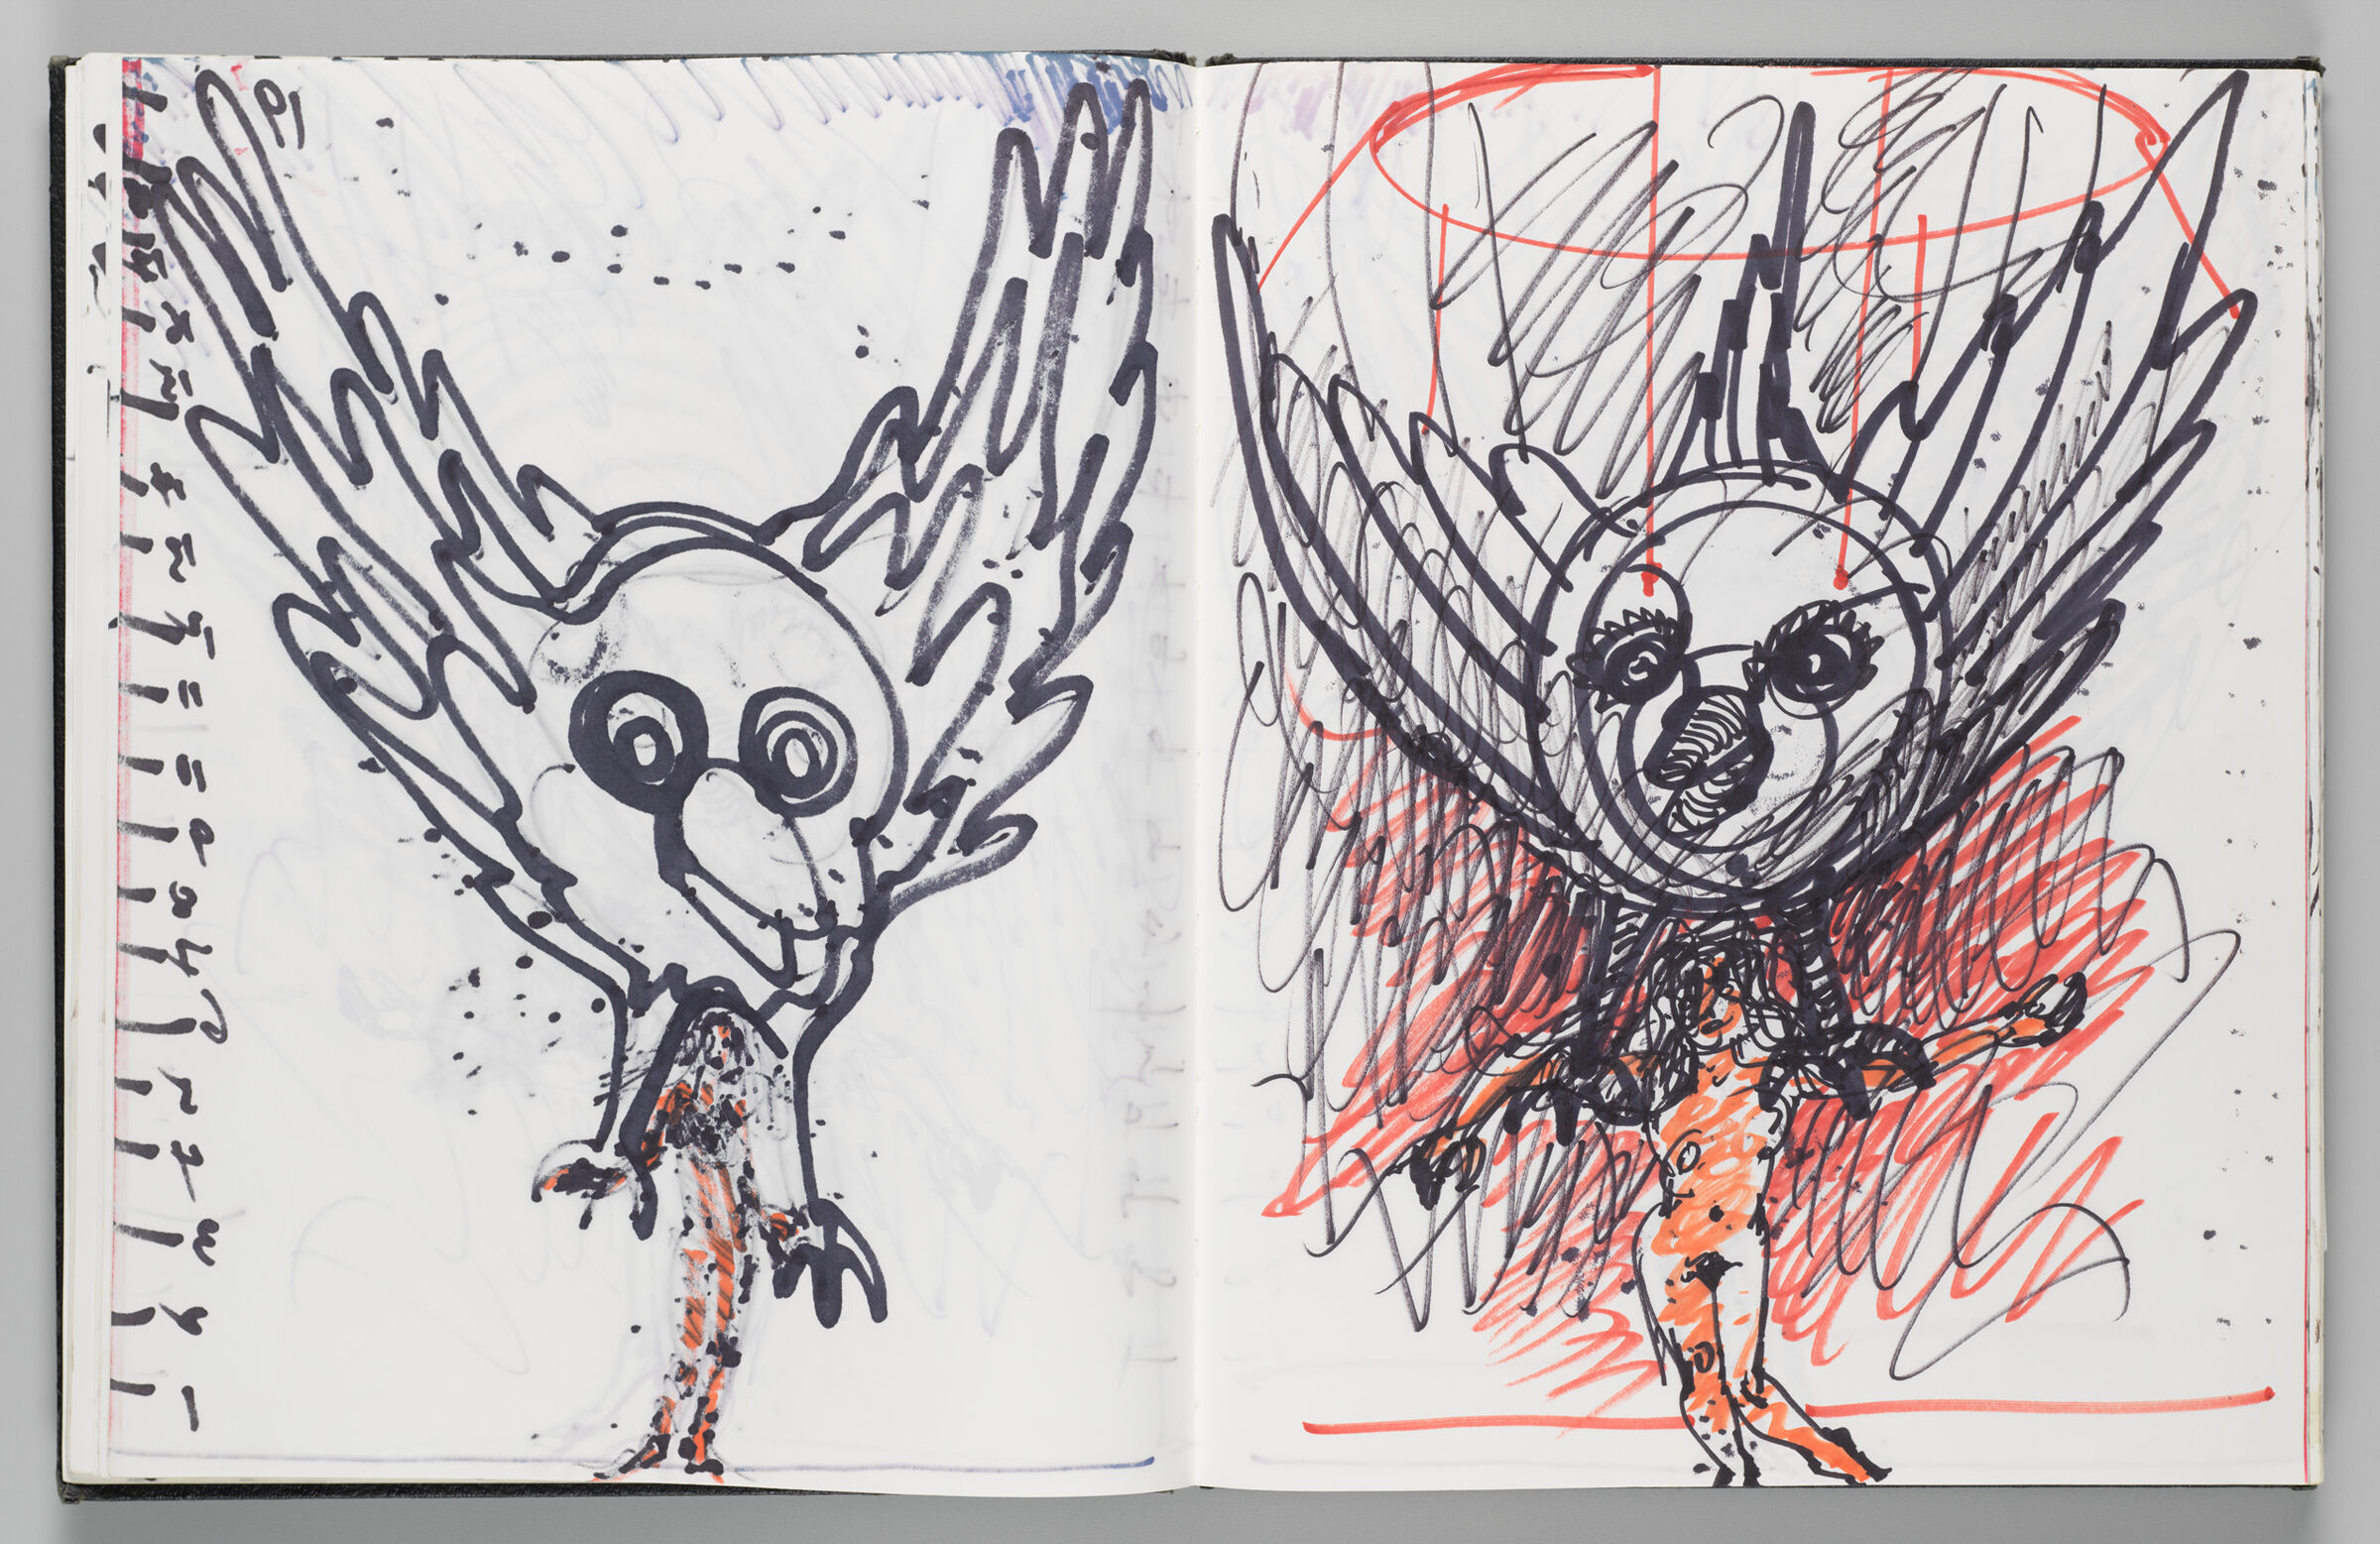 Untitled (Bleed-Through Of Previous Page, Left Page); Untitled (Sparrow Headpiece On Figure, Right Page)